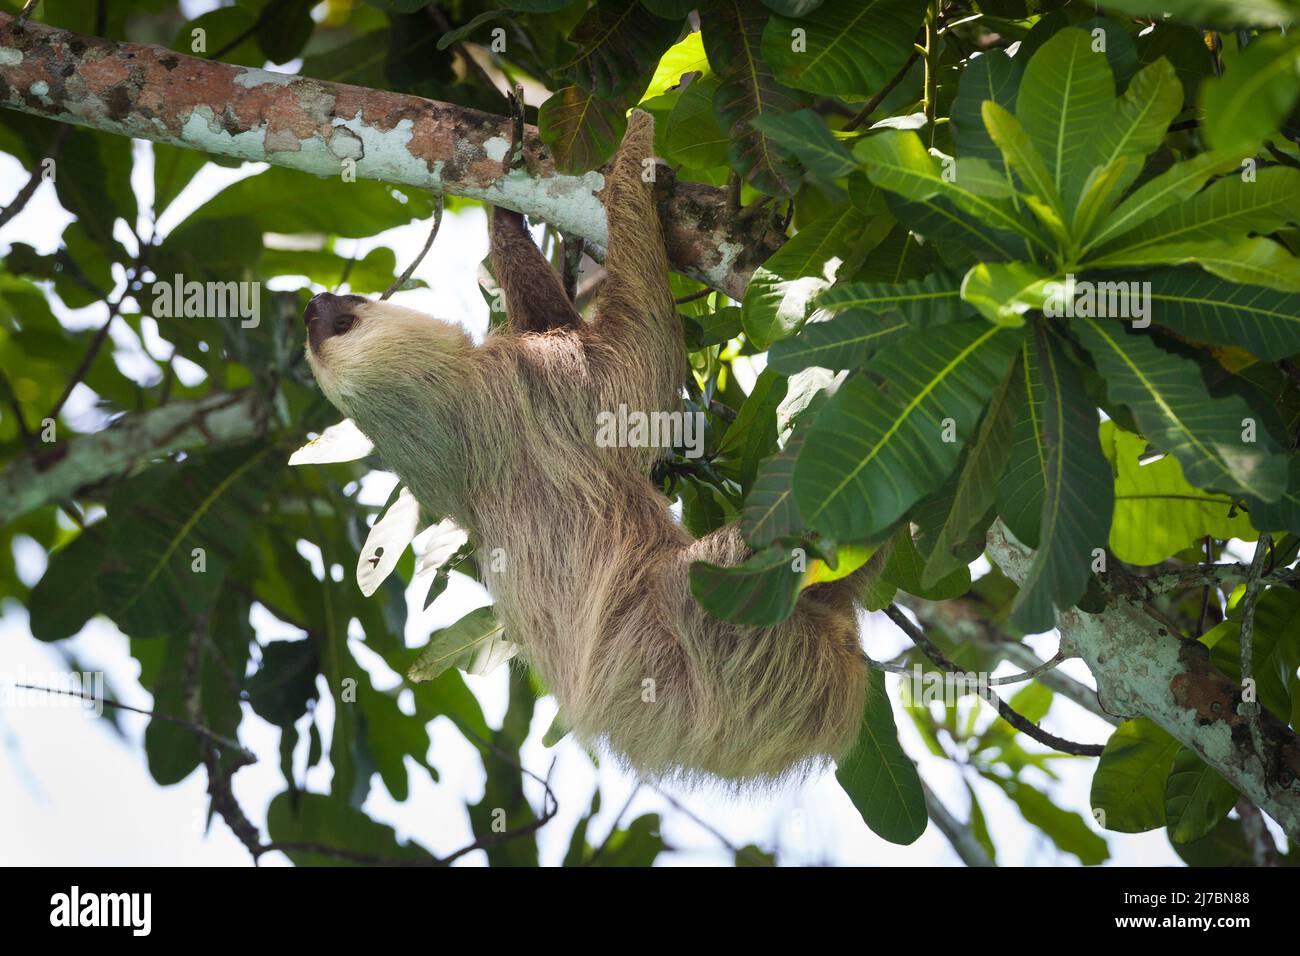 Panama wildllife with a two-toed sloth, Choloepus hoffmanni, in the rainforest of Soberania national park, Colon province, Republic of Panama. Stock Photo